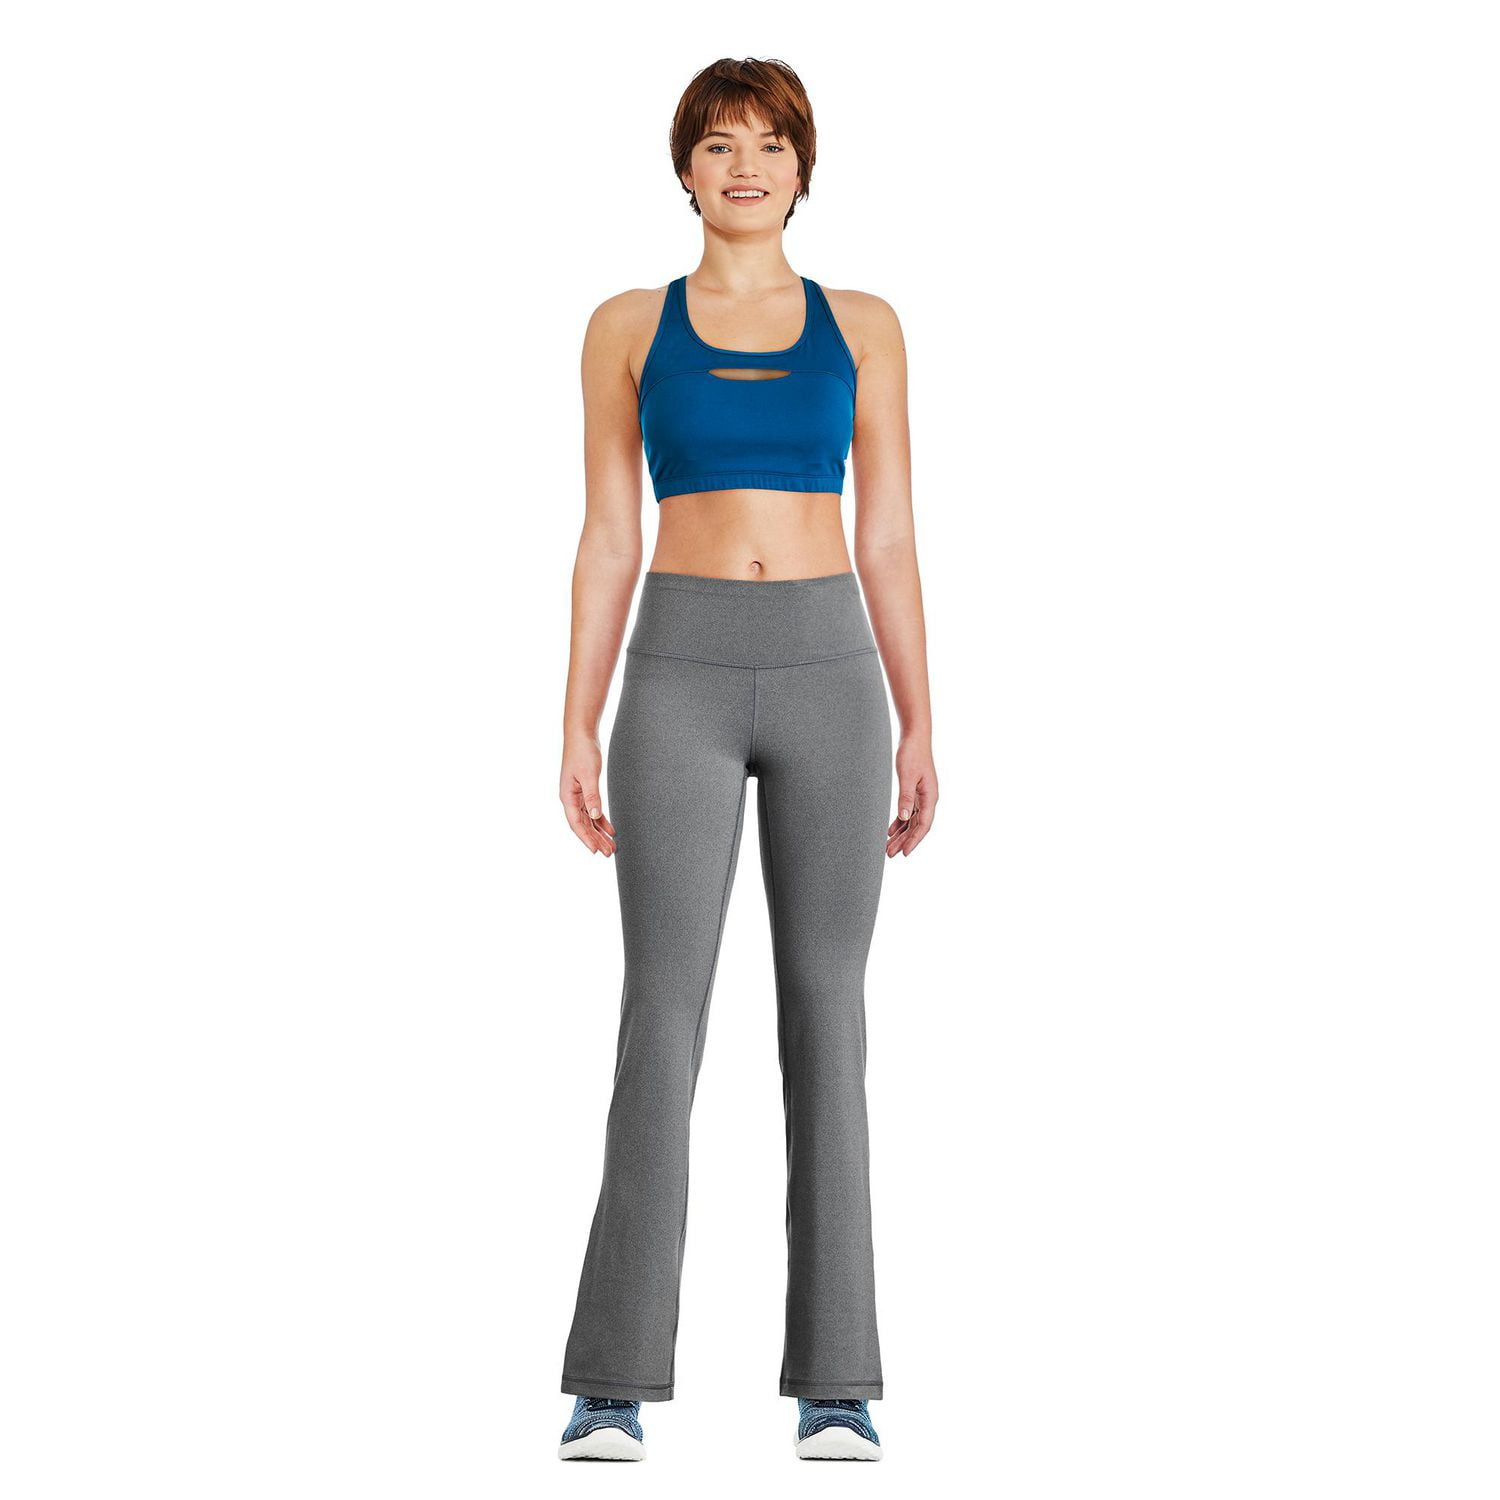 Affordable Activewear with Walmart – Lately With Lex